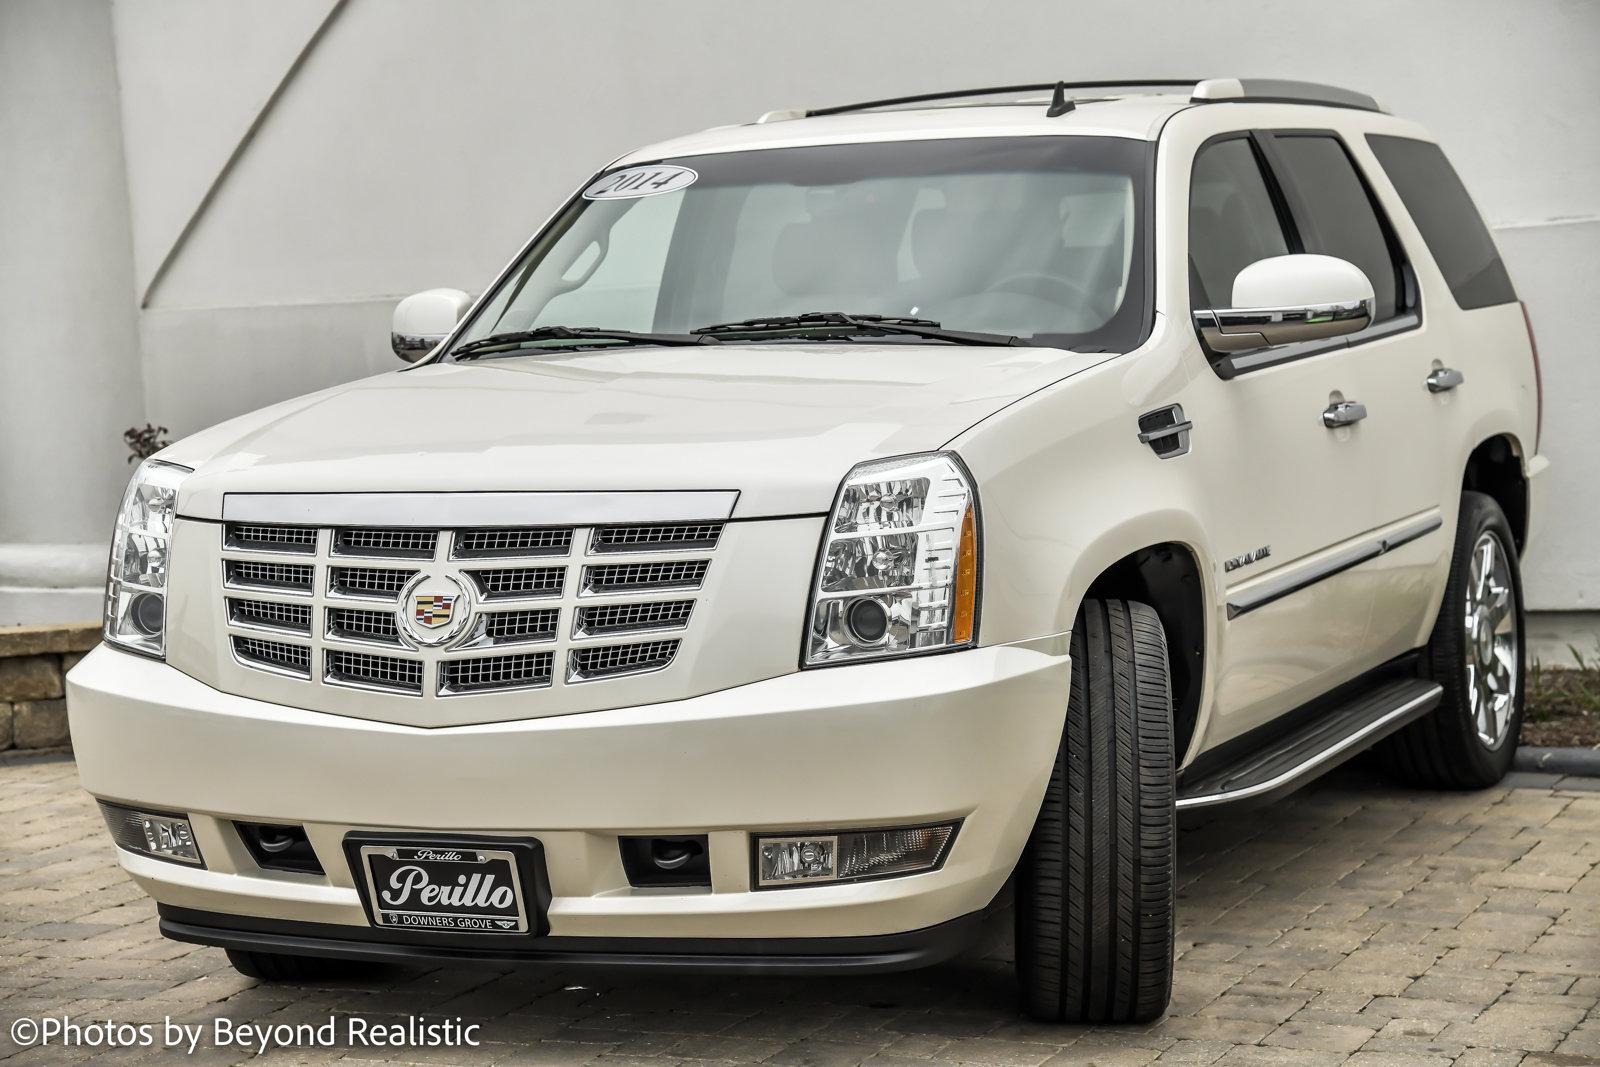 Used 2014 Cadillac Escalade Luxury, Rear Ent | Downers Grove, IL